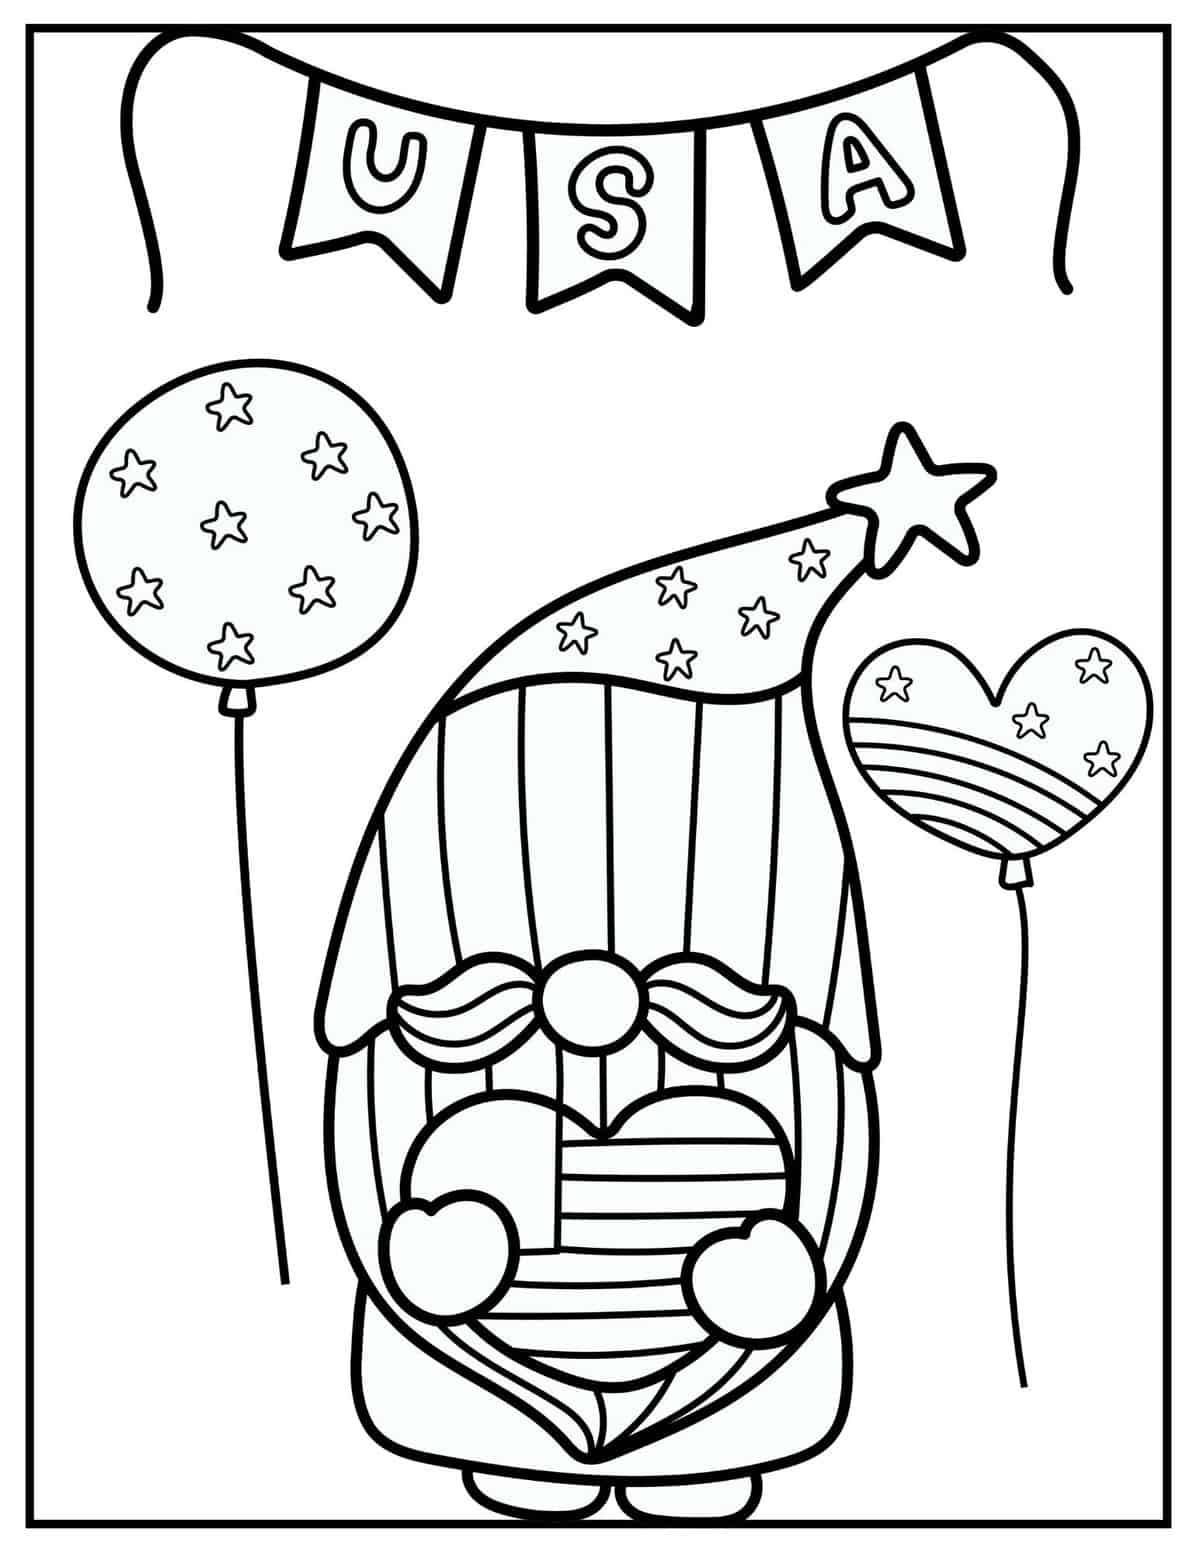 Free th of july coloring pages